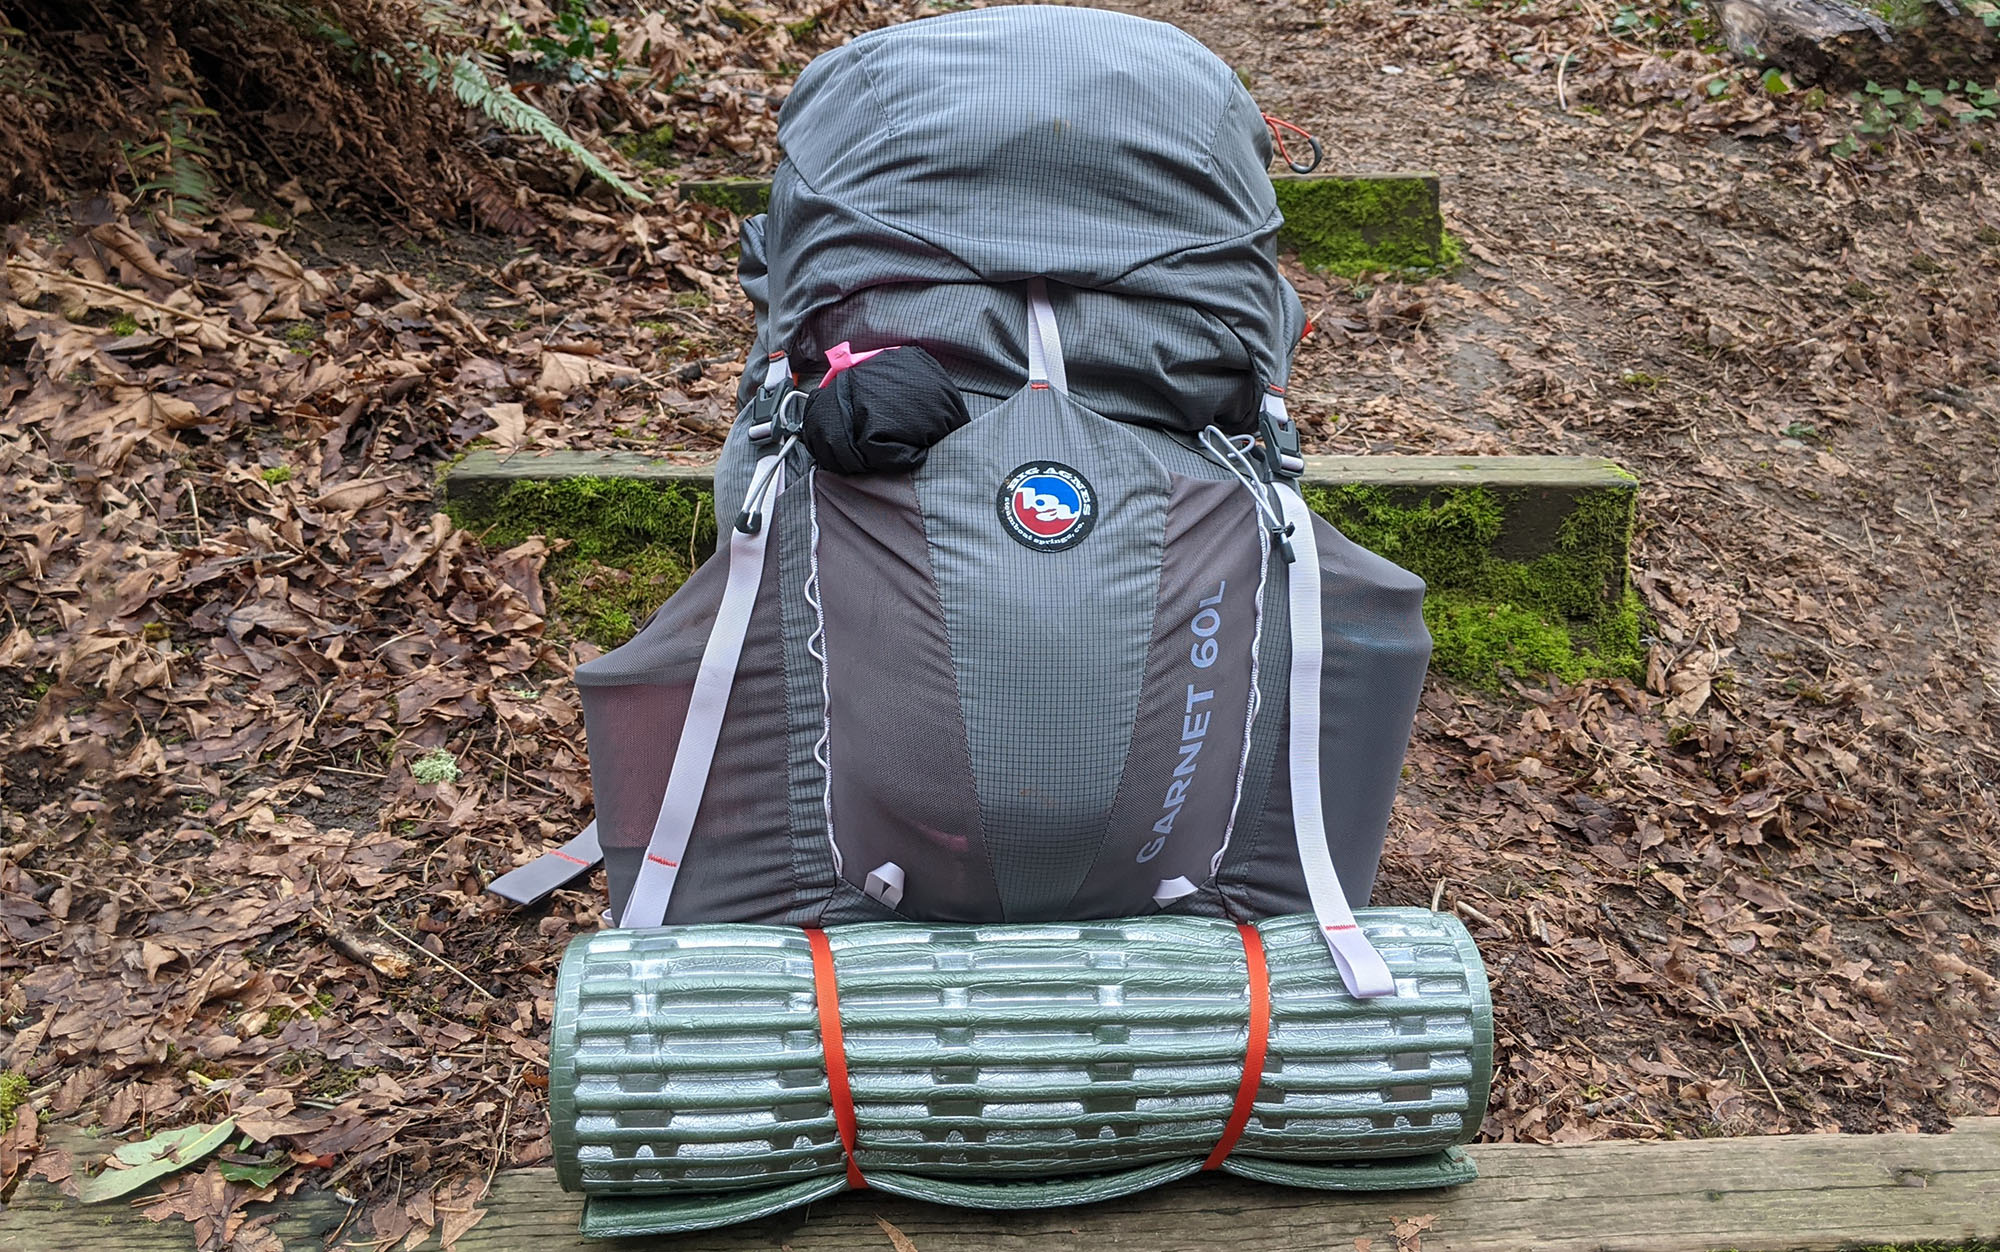 The Big Agnes Garnet is a 60L backpack for women.